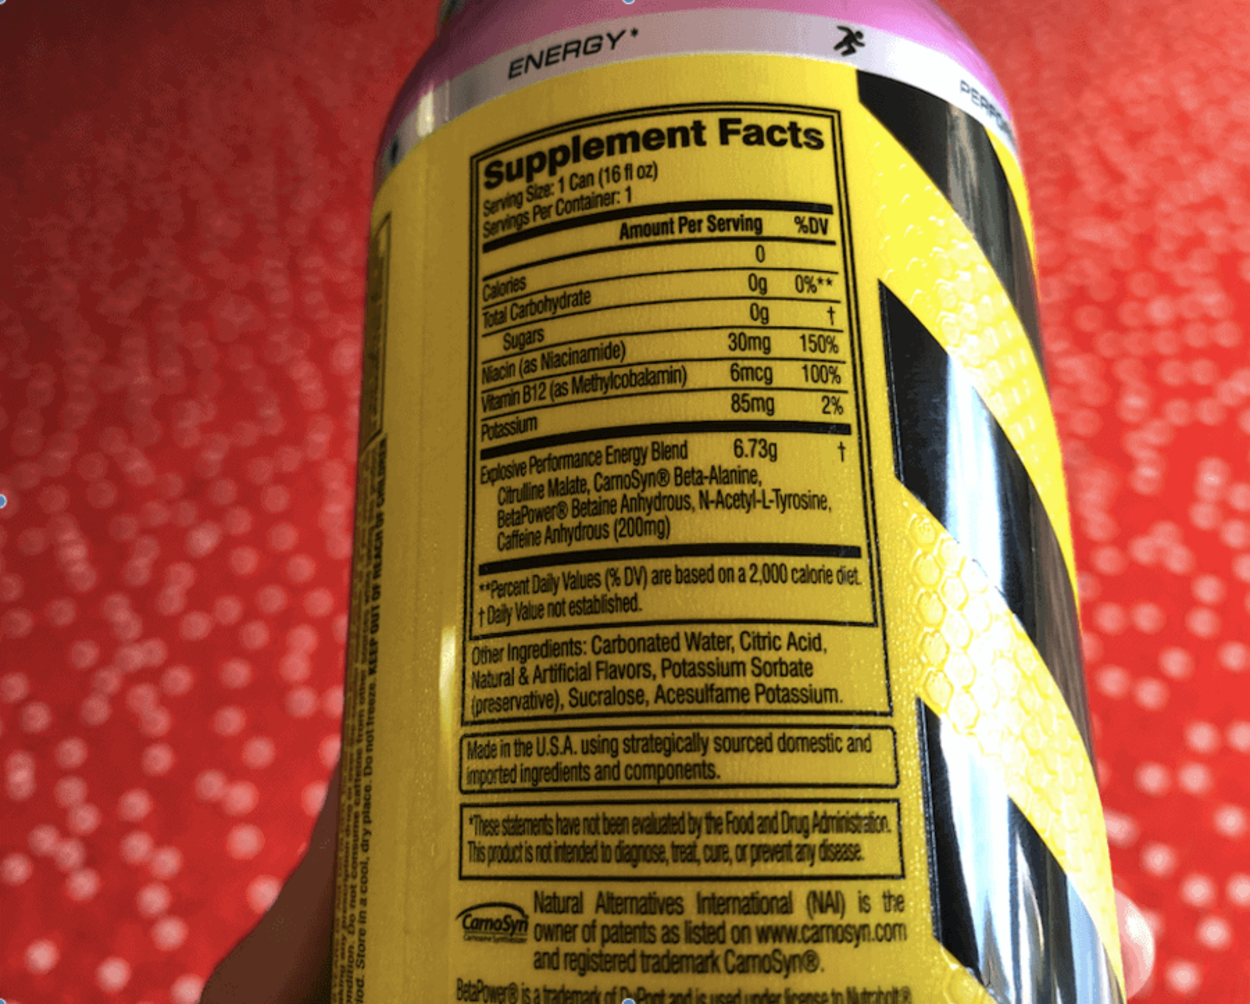 C4 Energy Drink Ingredients at the back of the can.